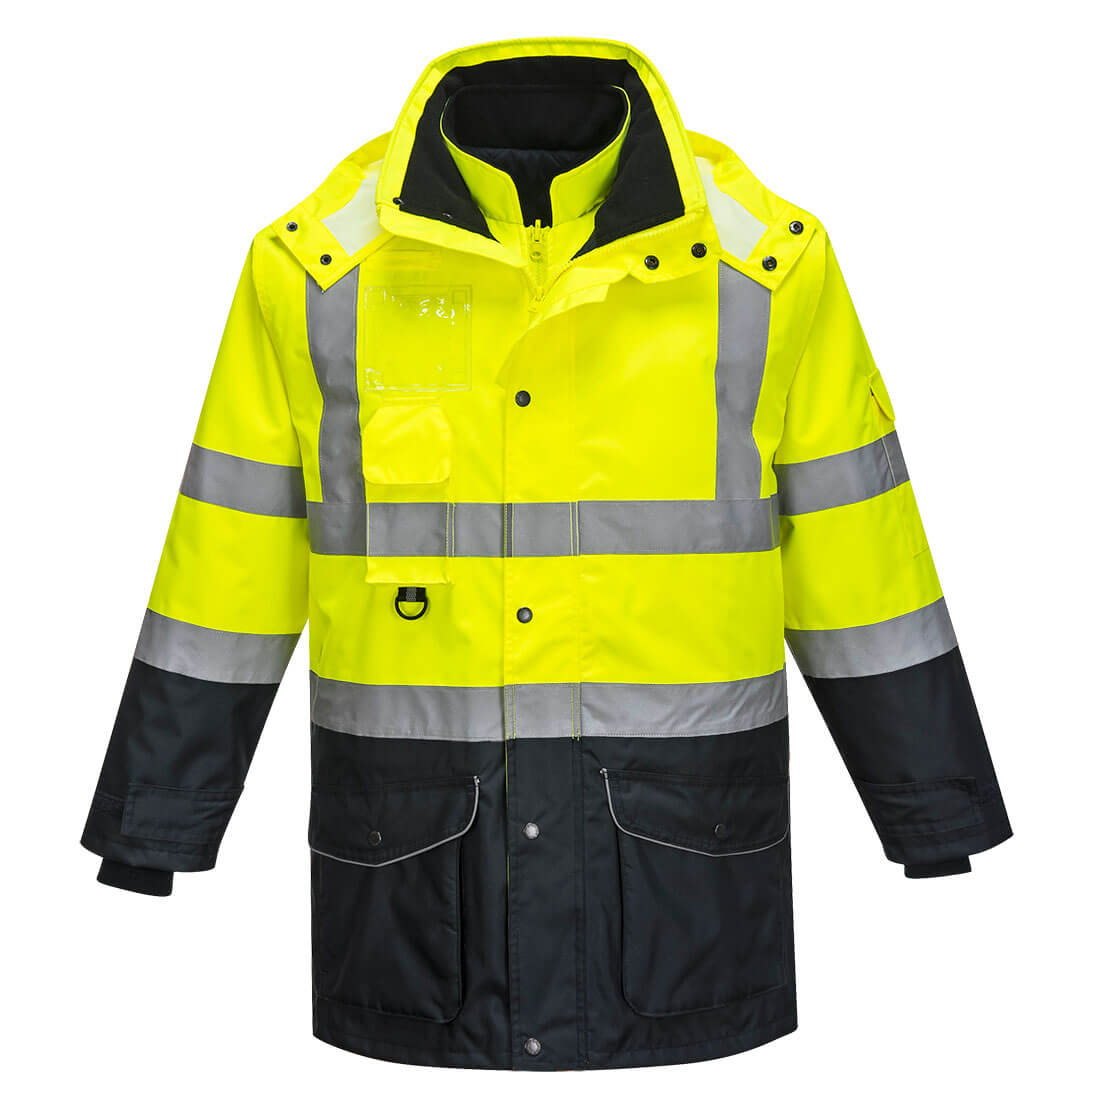 Image of Oxford Weave 300D Class 3 Hi Vis 7-in-1 Contrast Traffic Jacket Yellow / Navy 2XL